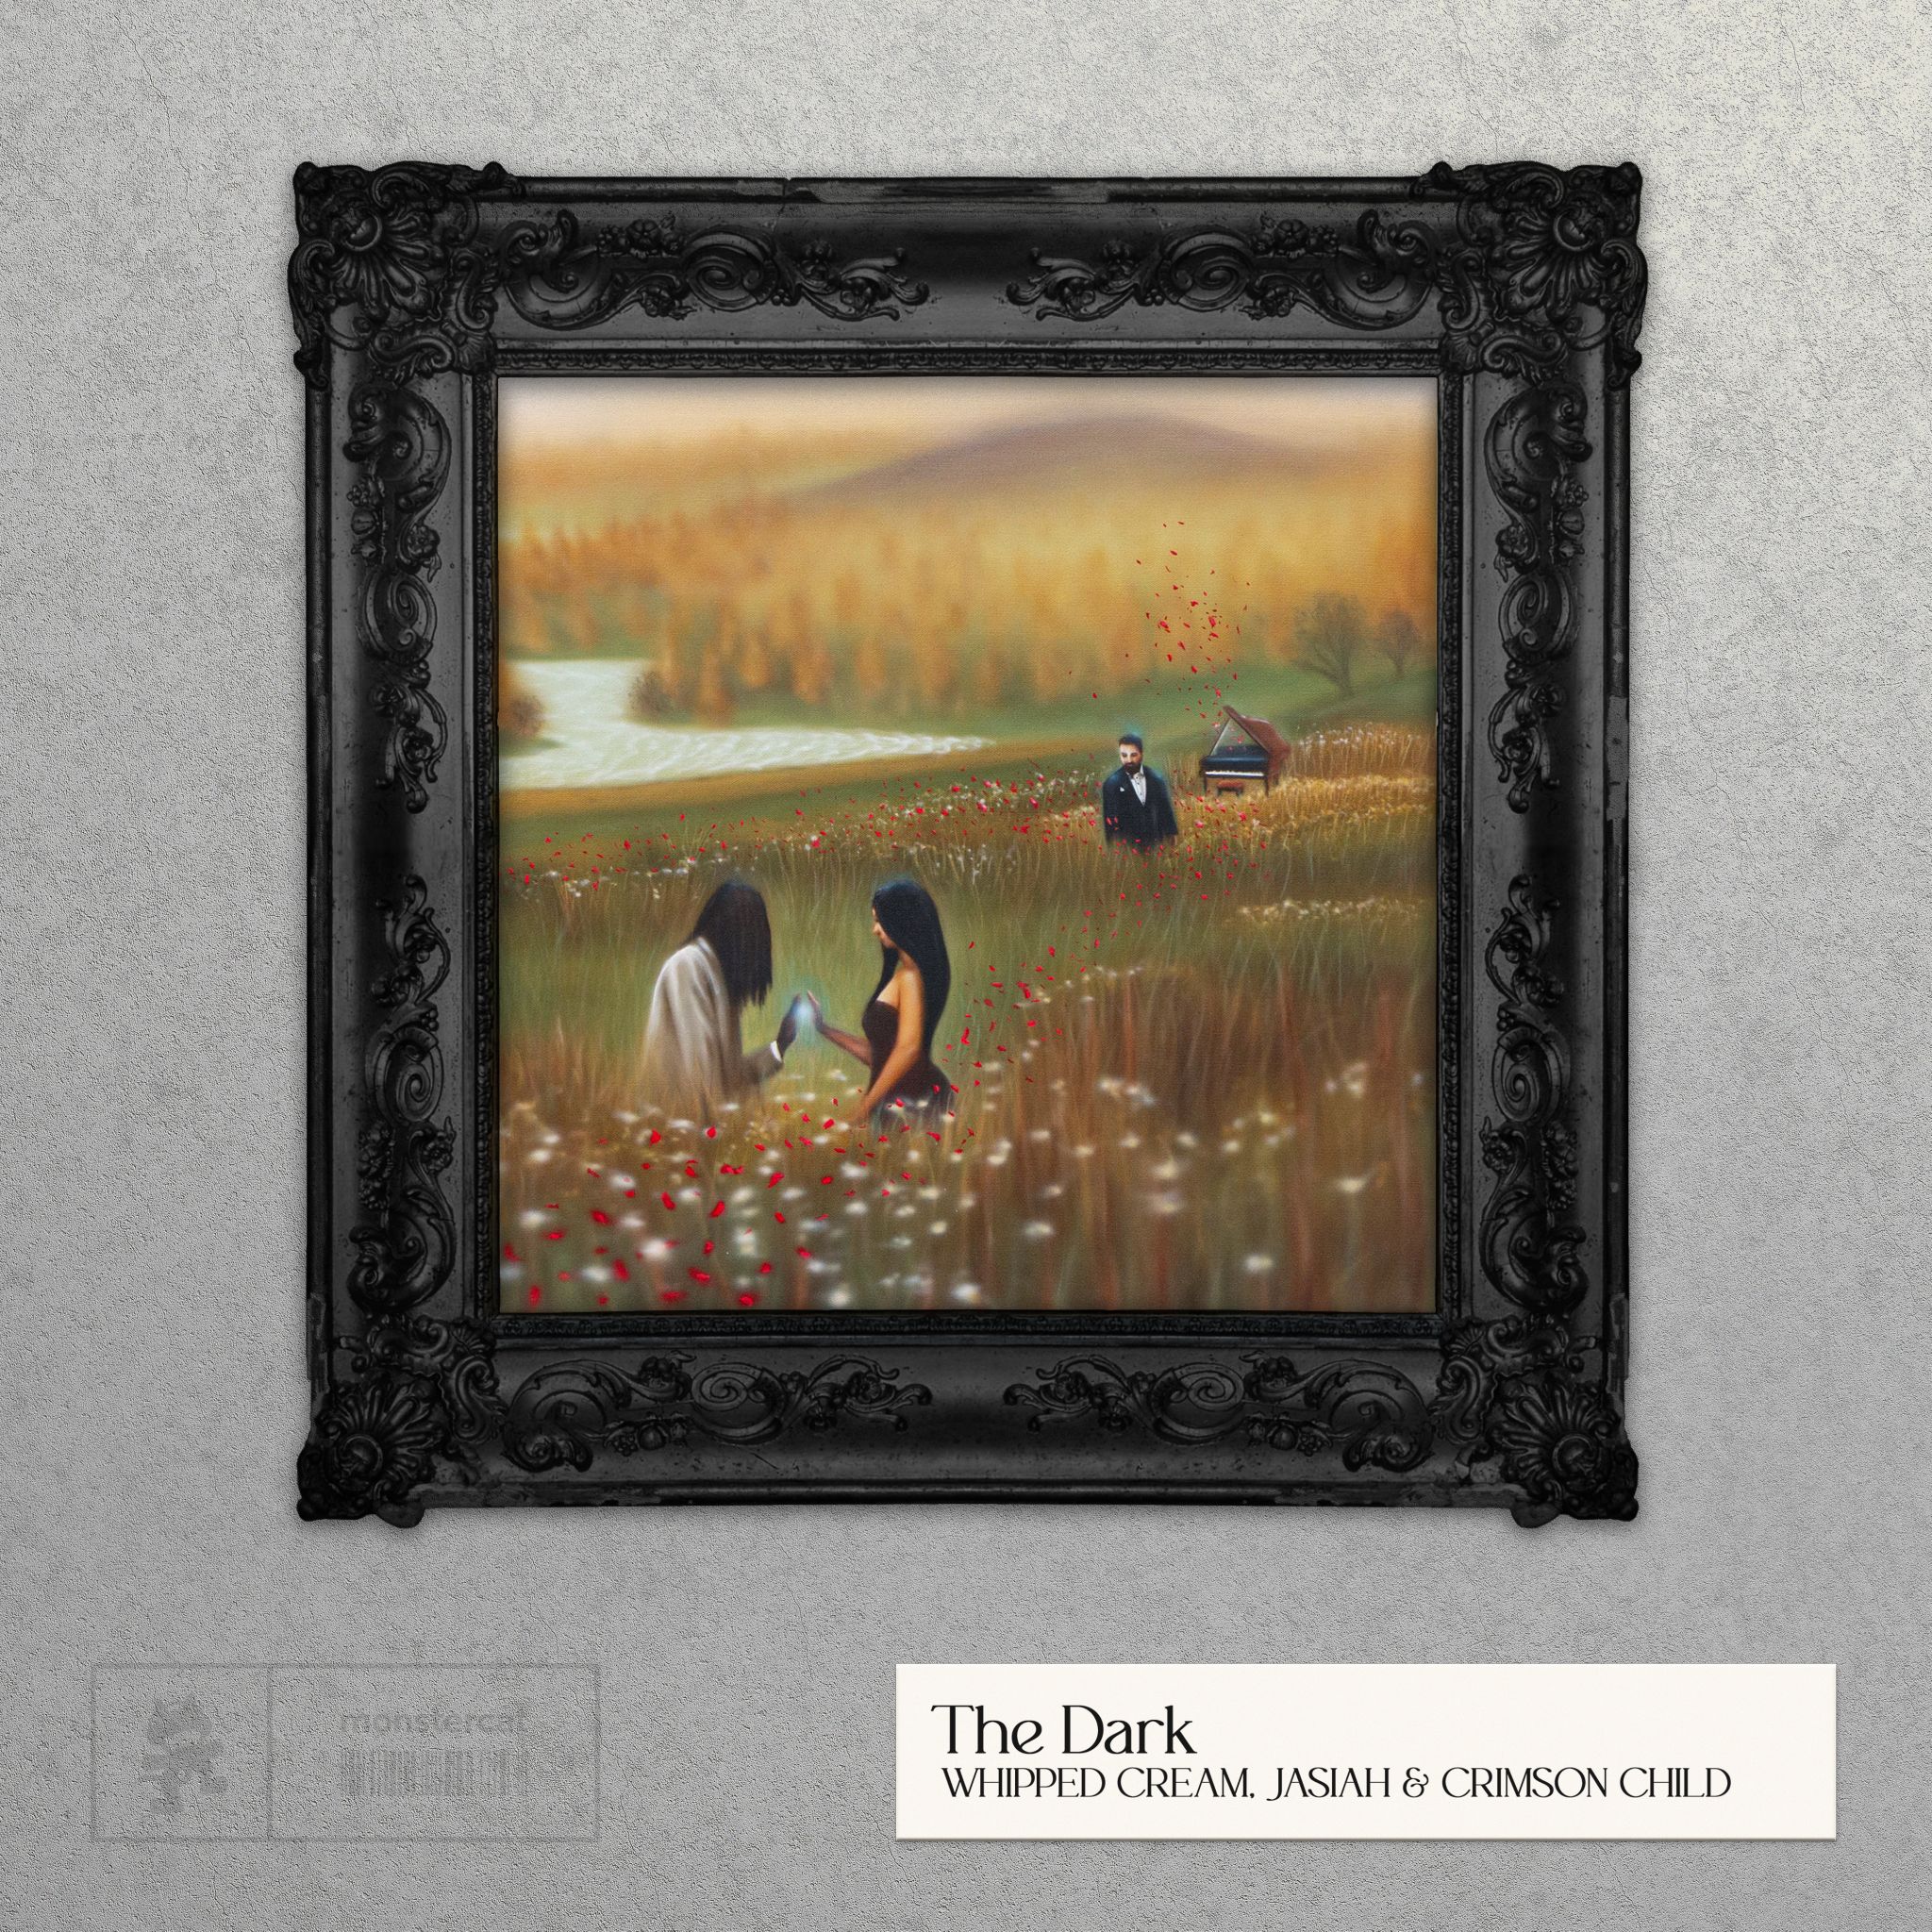 Jasiah & Crimson Child Connect With WHIPPED CREAM On “The Dark” Collaborative Single